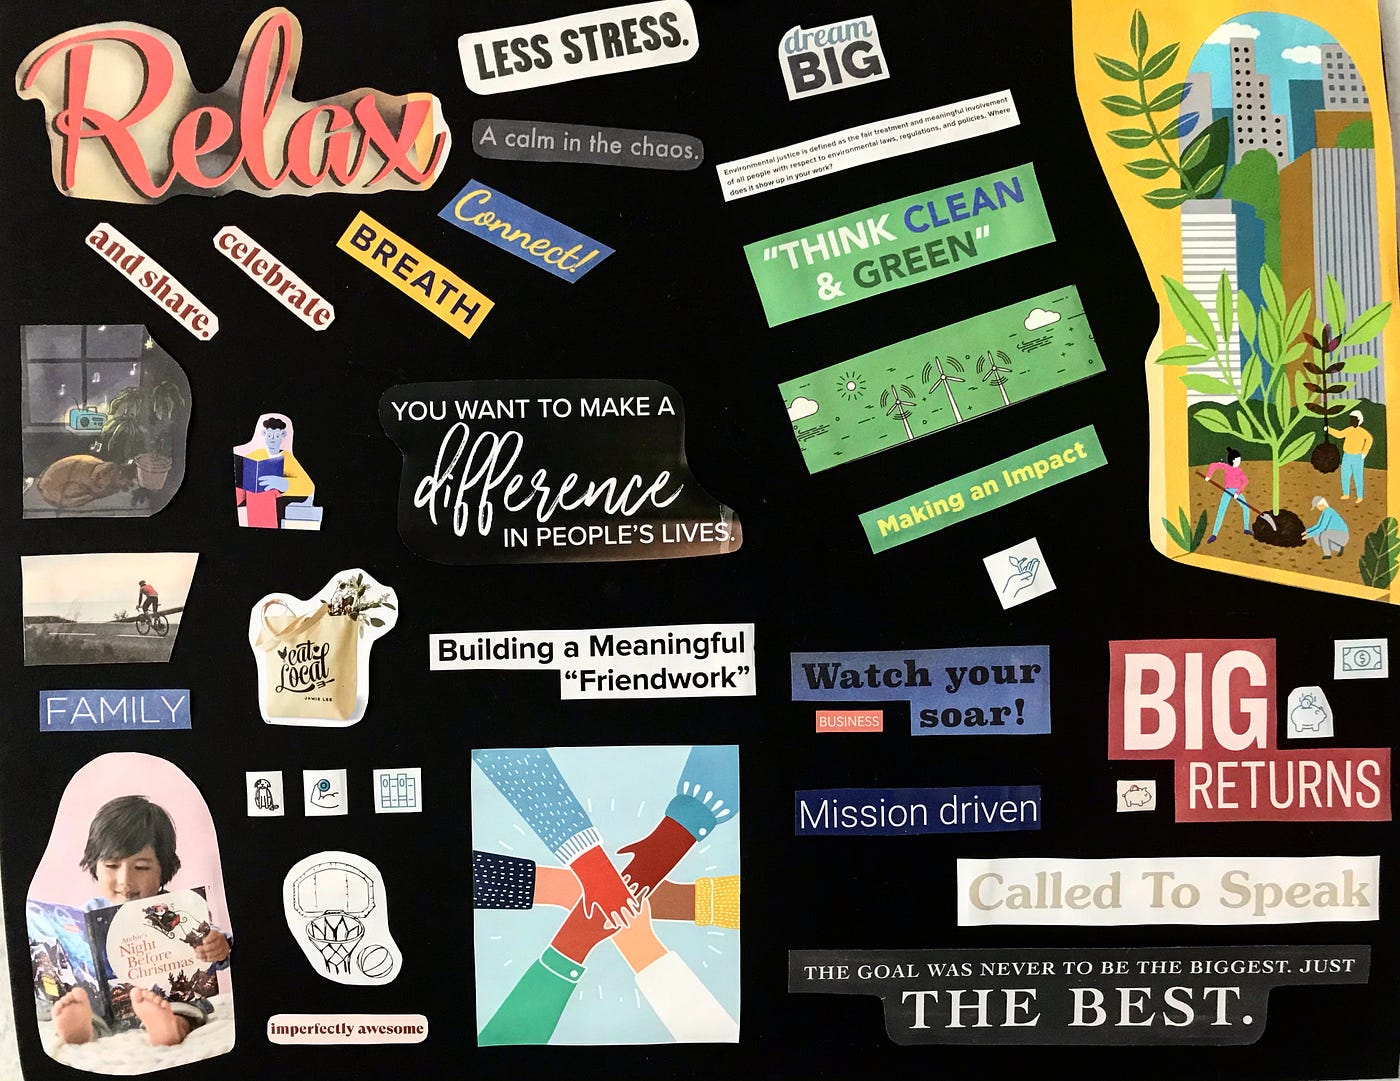 HOW TO MAKE A VISION BOARD FOR MEN, Creating a Vision Board